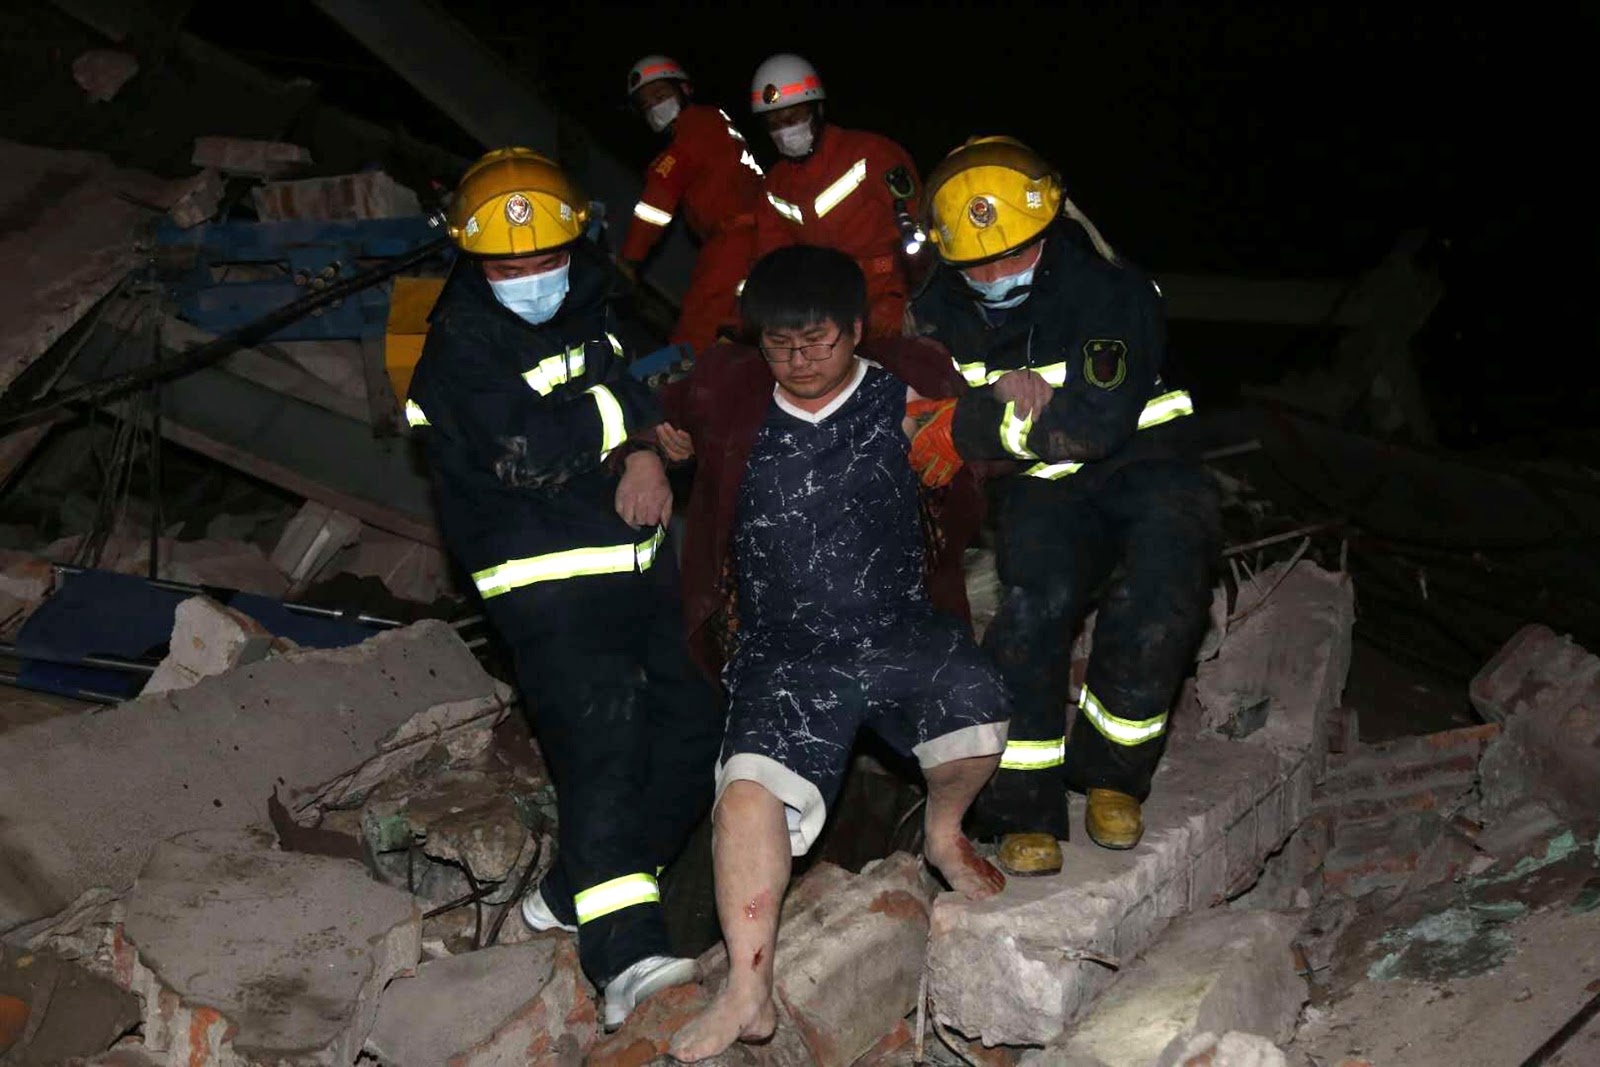  Firefighters rescue a man from the collapsed hotel which was housing quarantined people